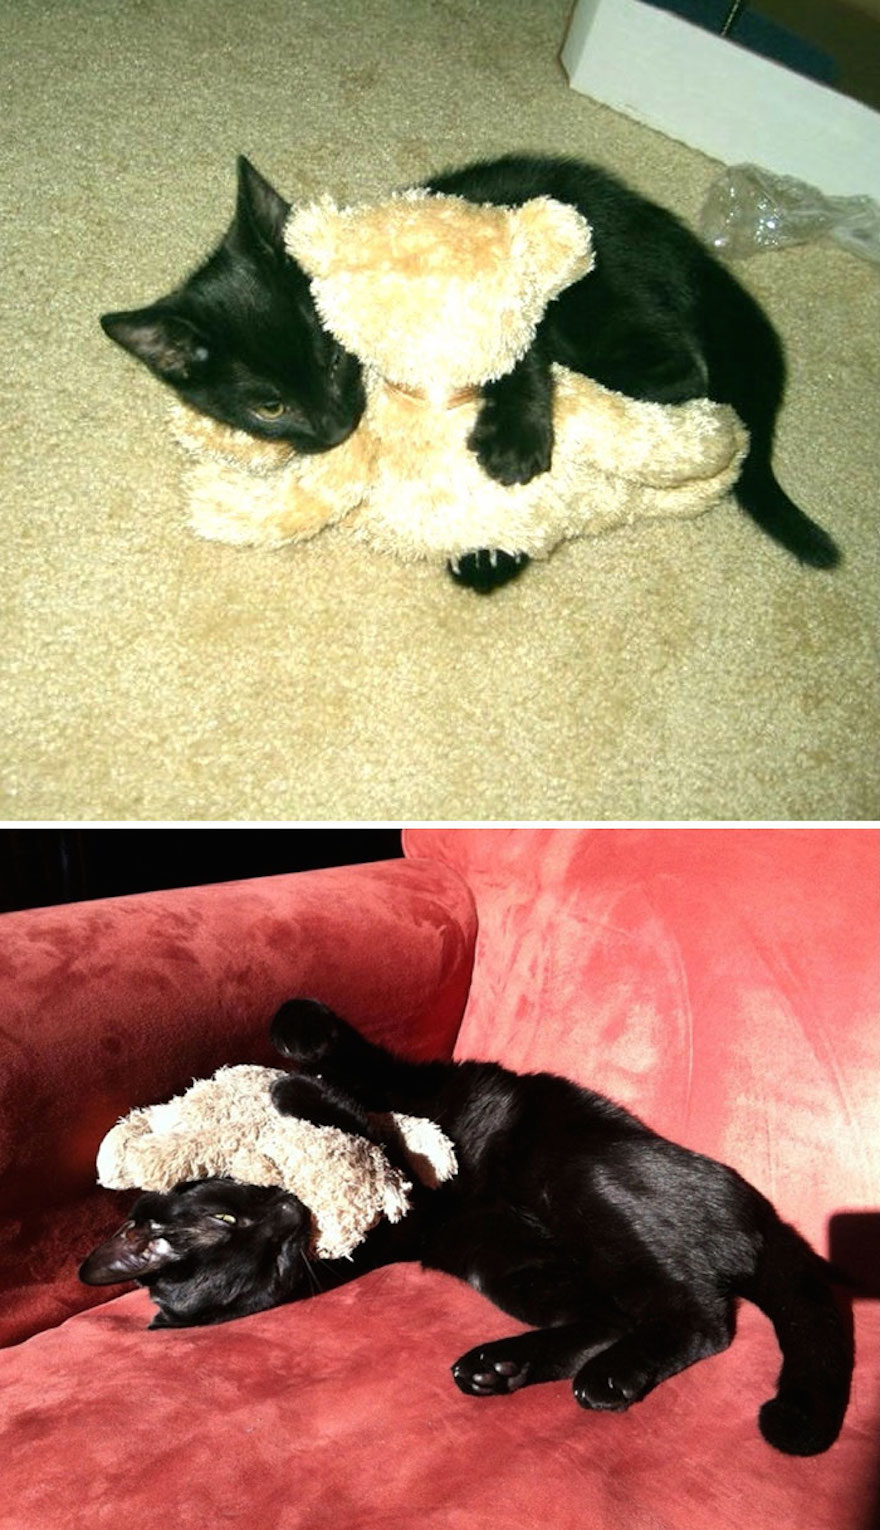 He’s addicted to his teddy bear